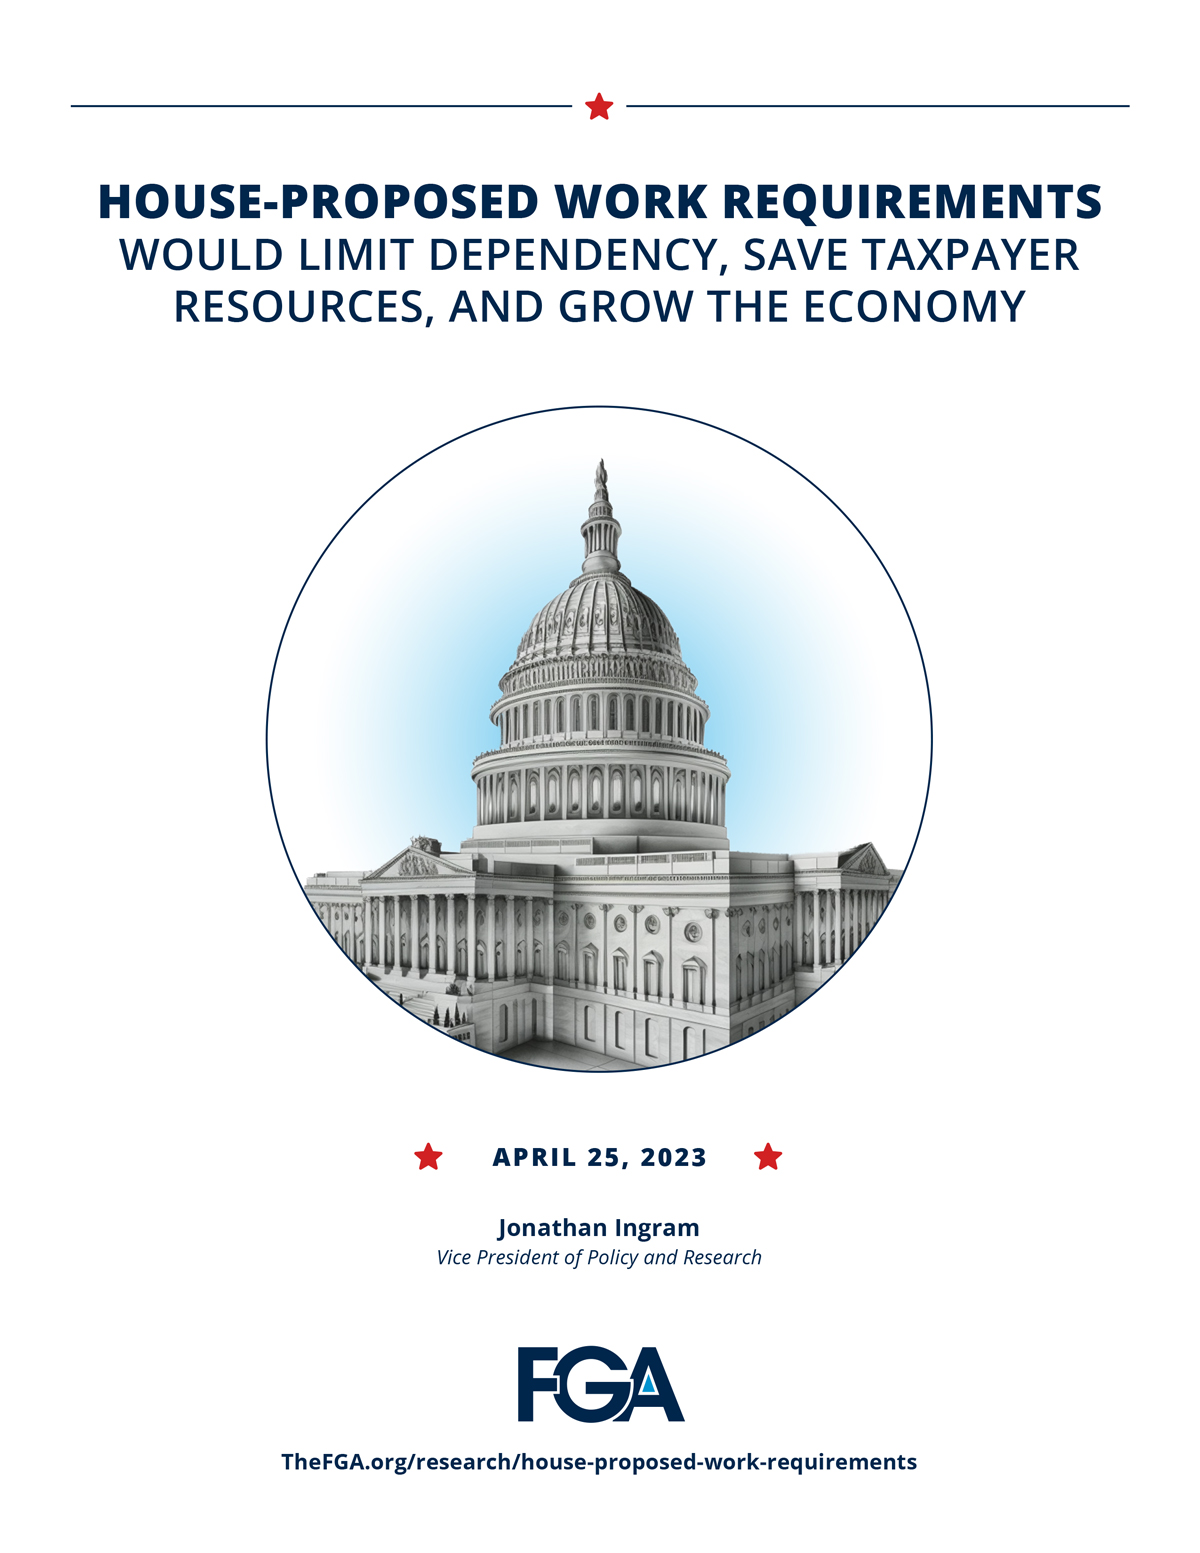 House-Proposed Work Requirements Would Limit Dependency, Save Taxpayer Resources, and Grow the Economy